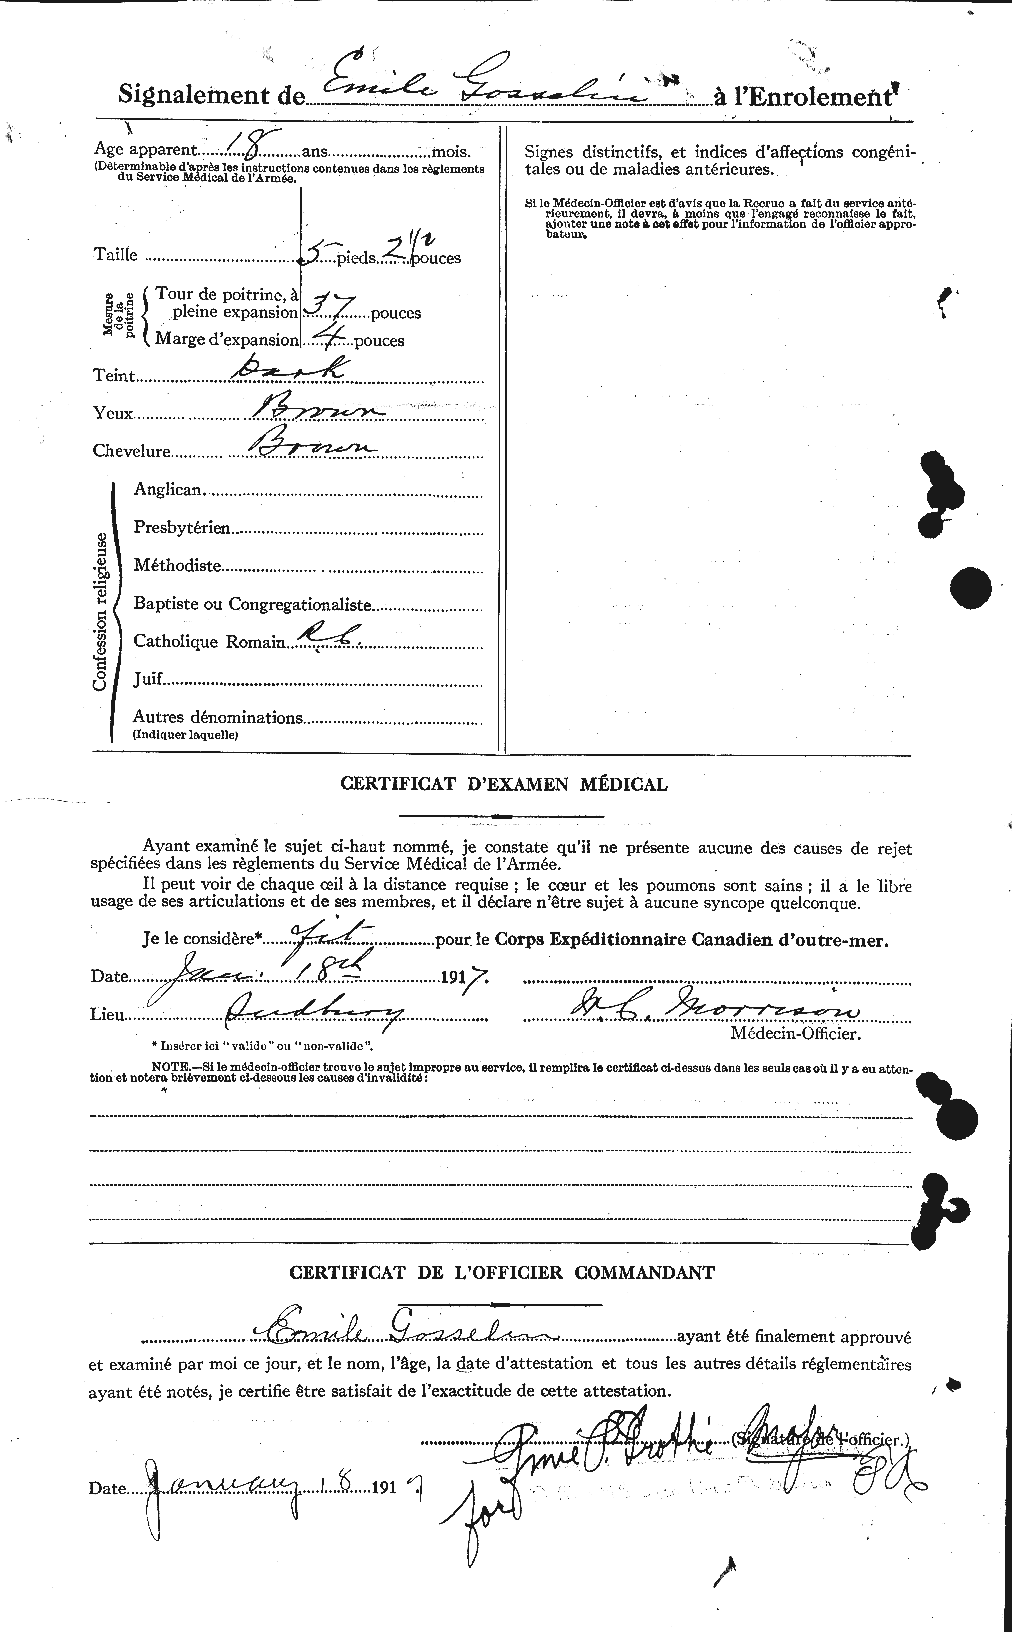 Personnel Records of the First World War - CEF 358894b